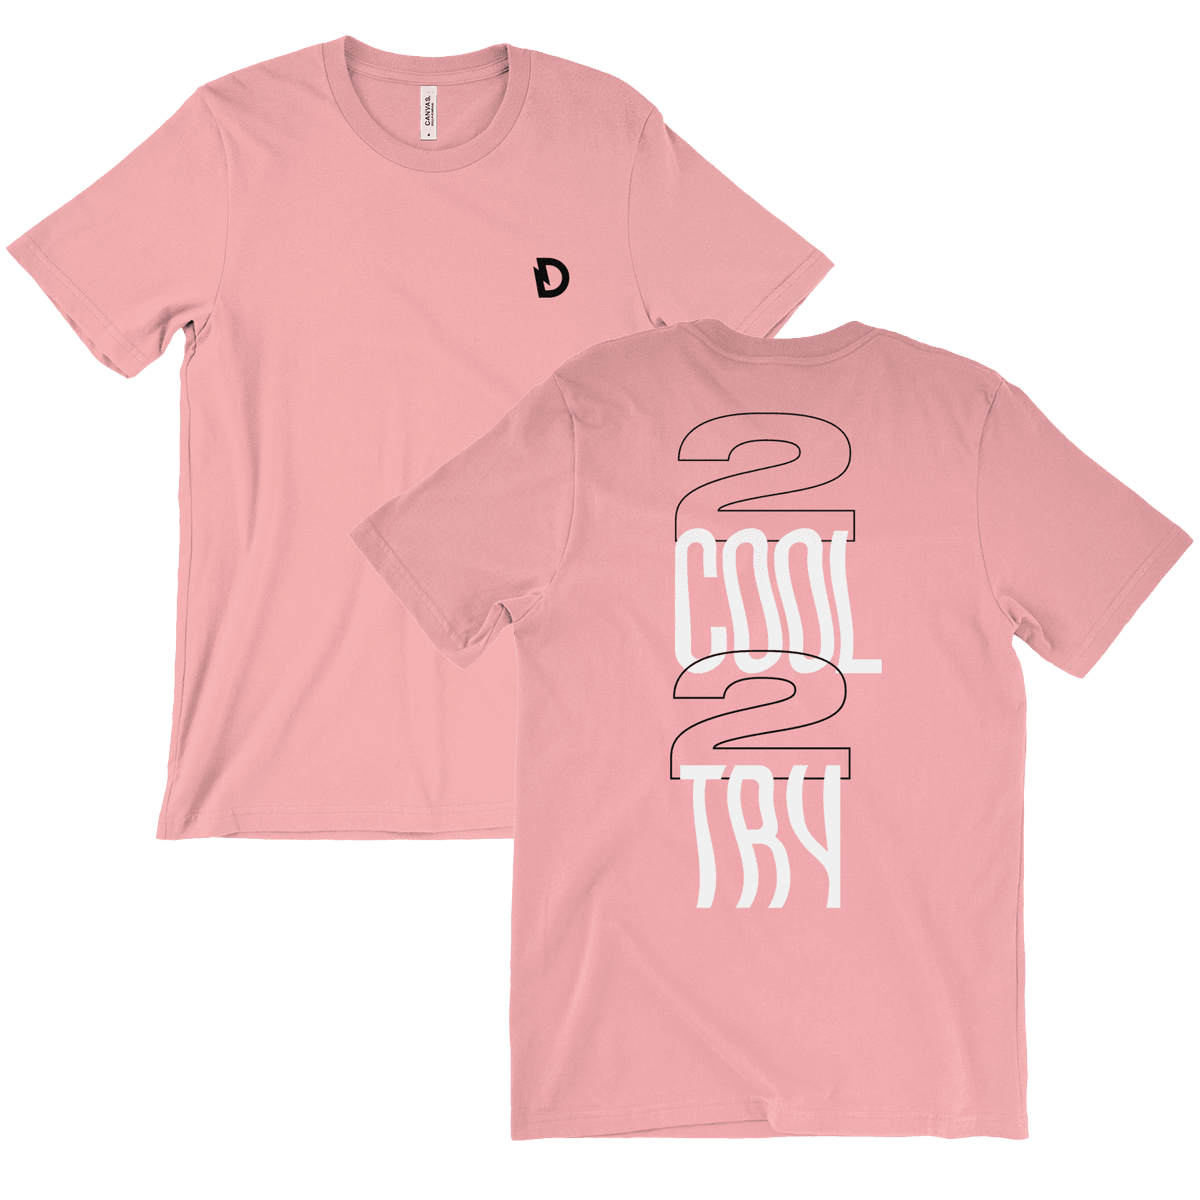 "2 Cool 2 Try" T-Shirt